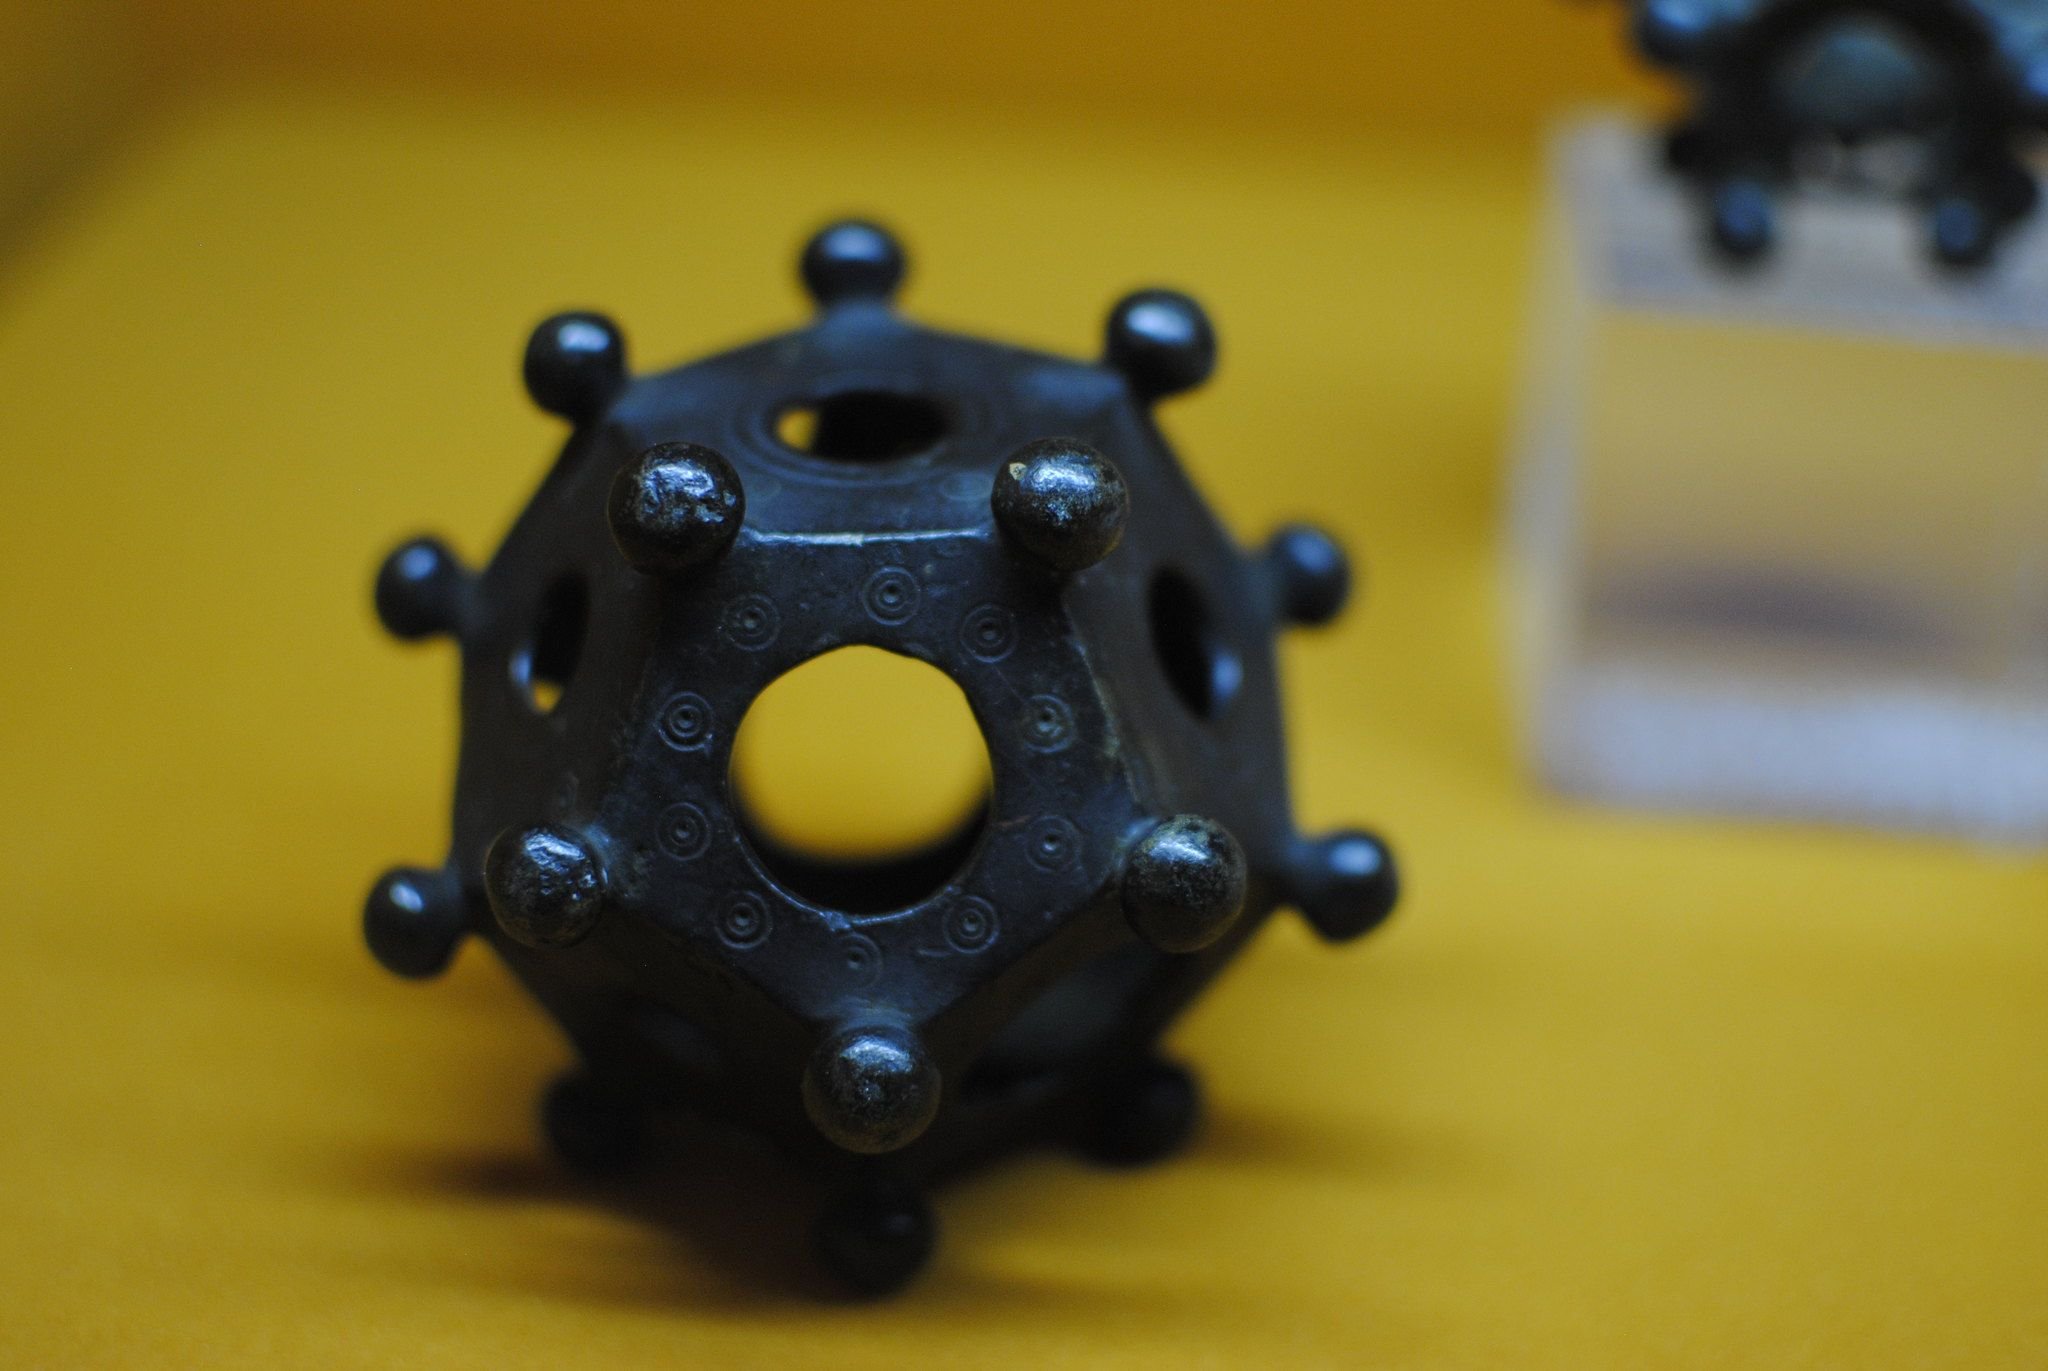 A Roman dodecahedron found in England intrigues researchers